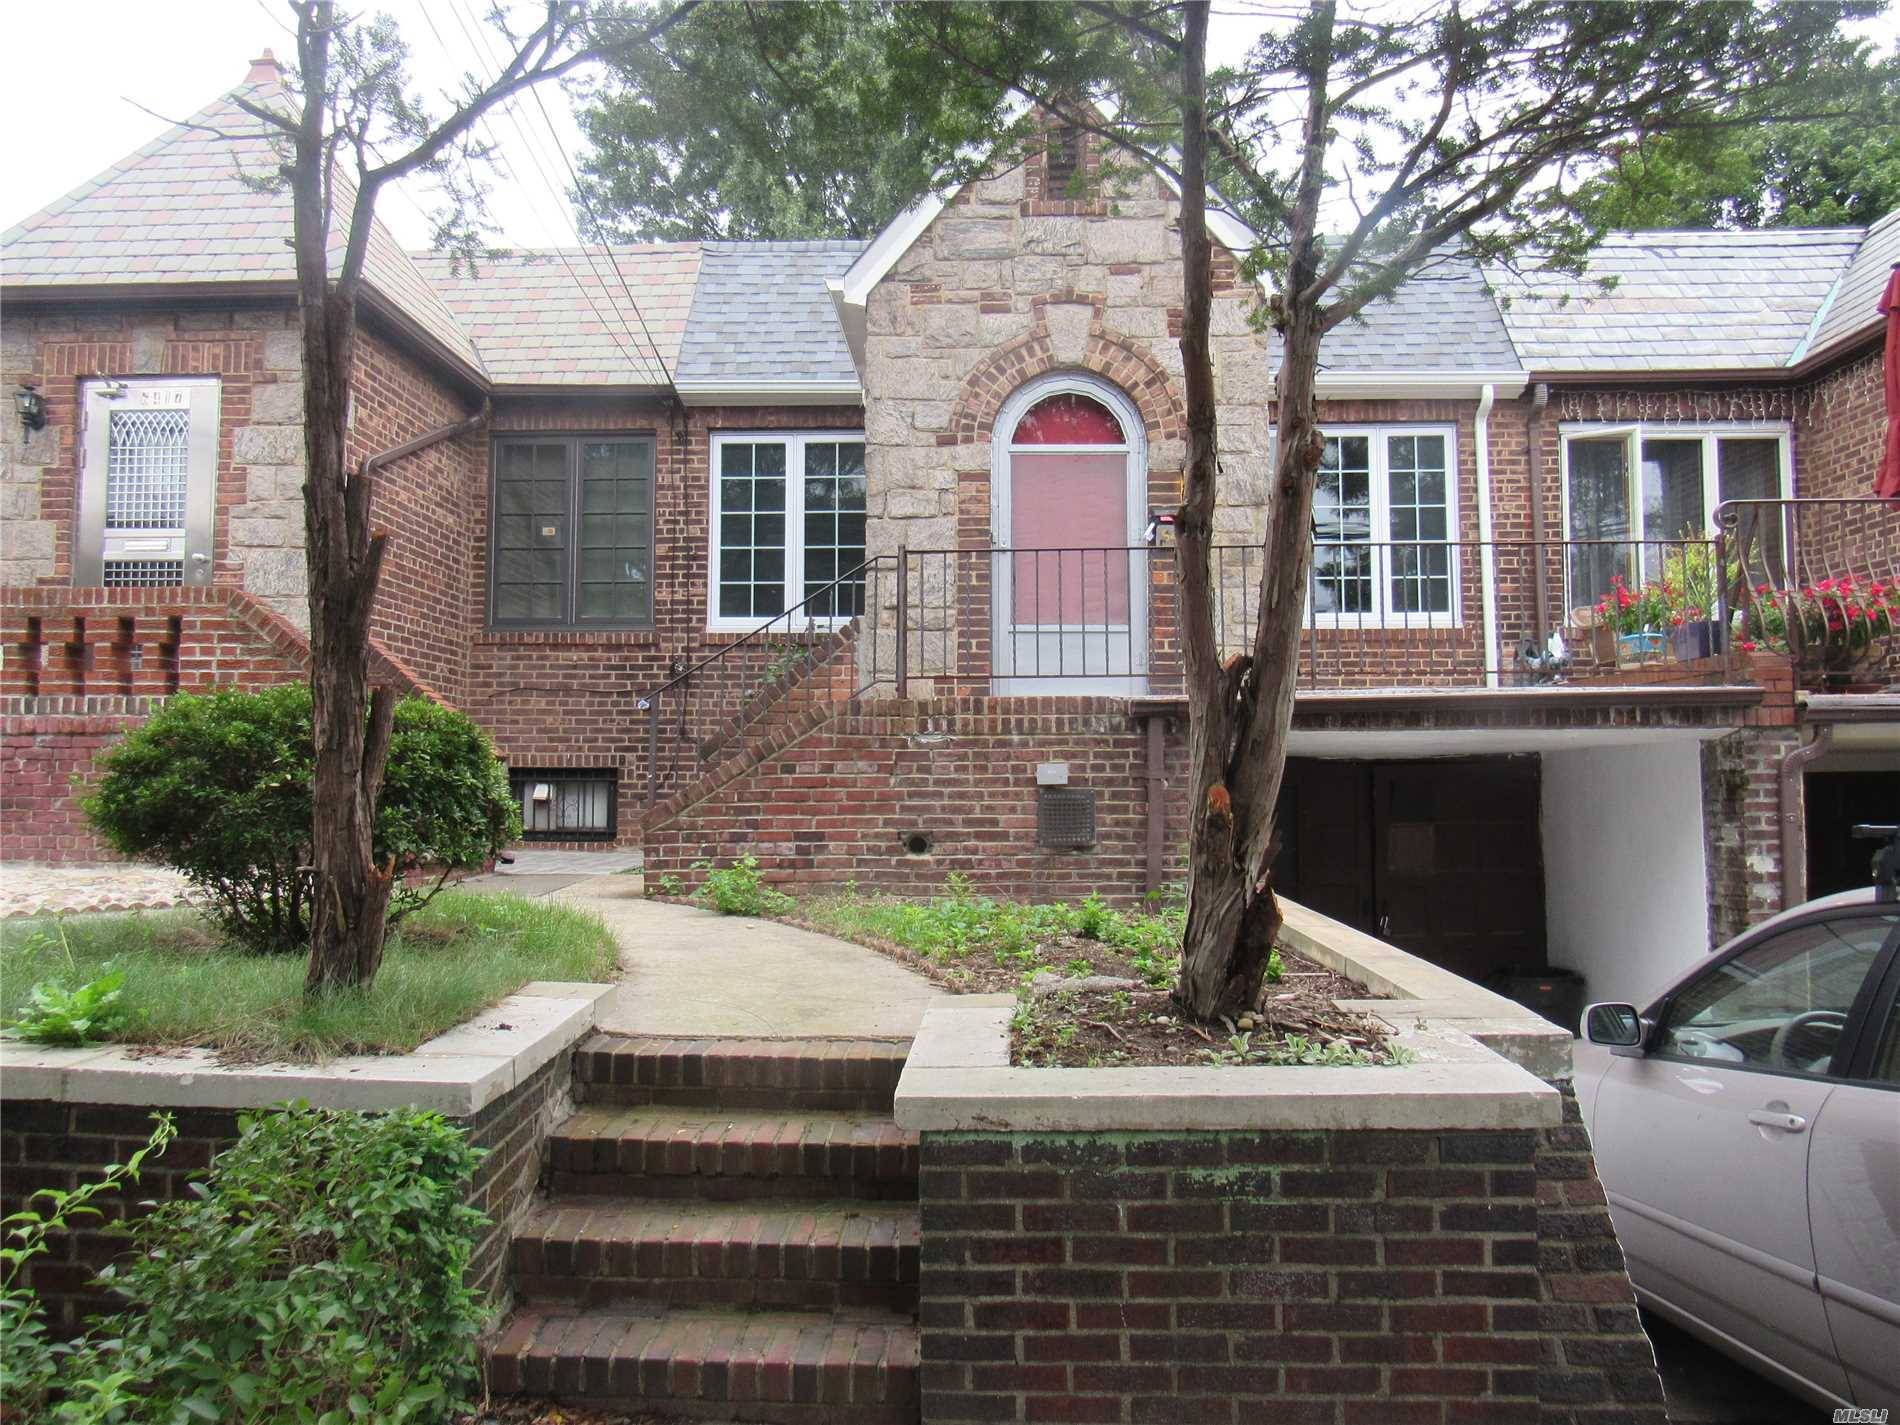 Brick 2 Bedroom High Ranch With Street Level Basement.